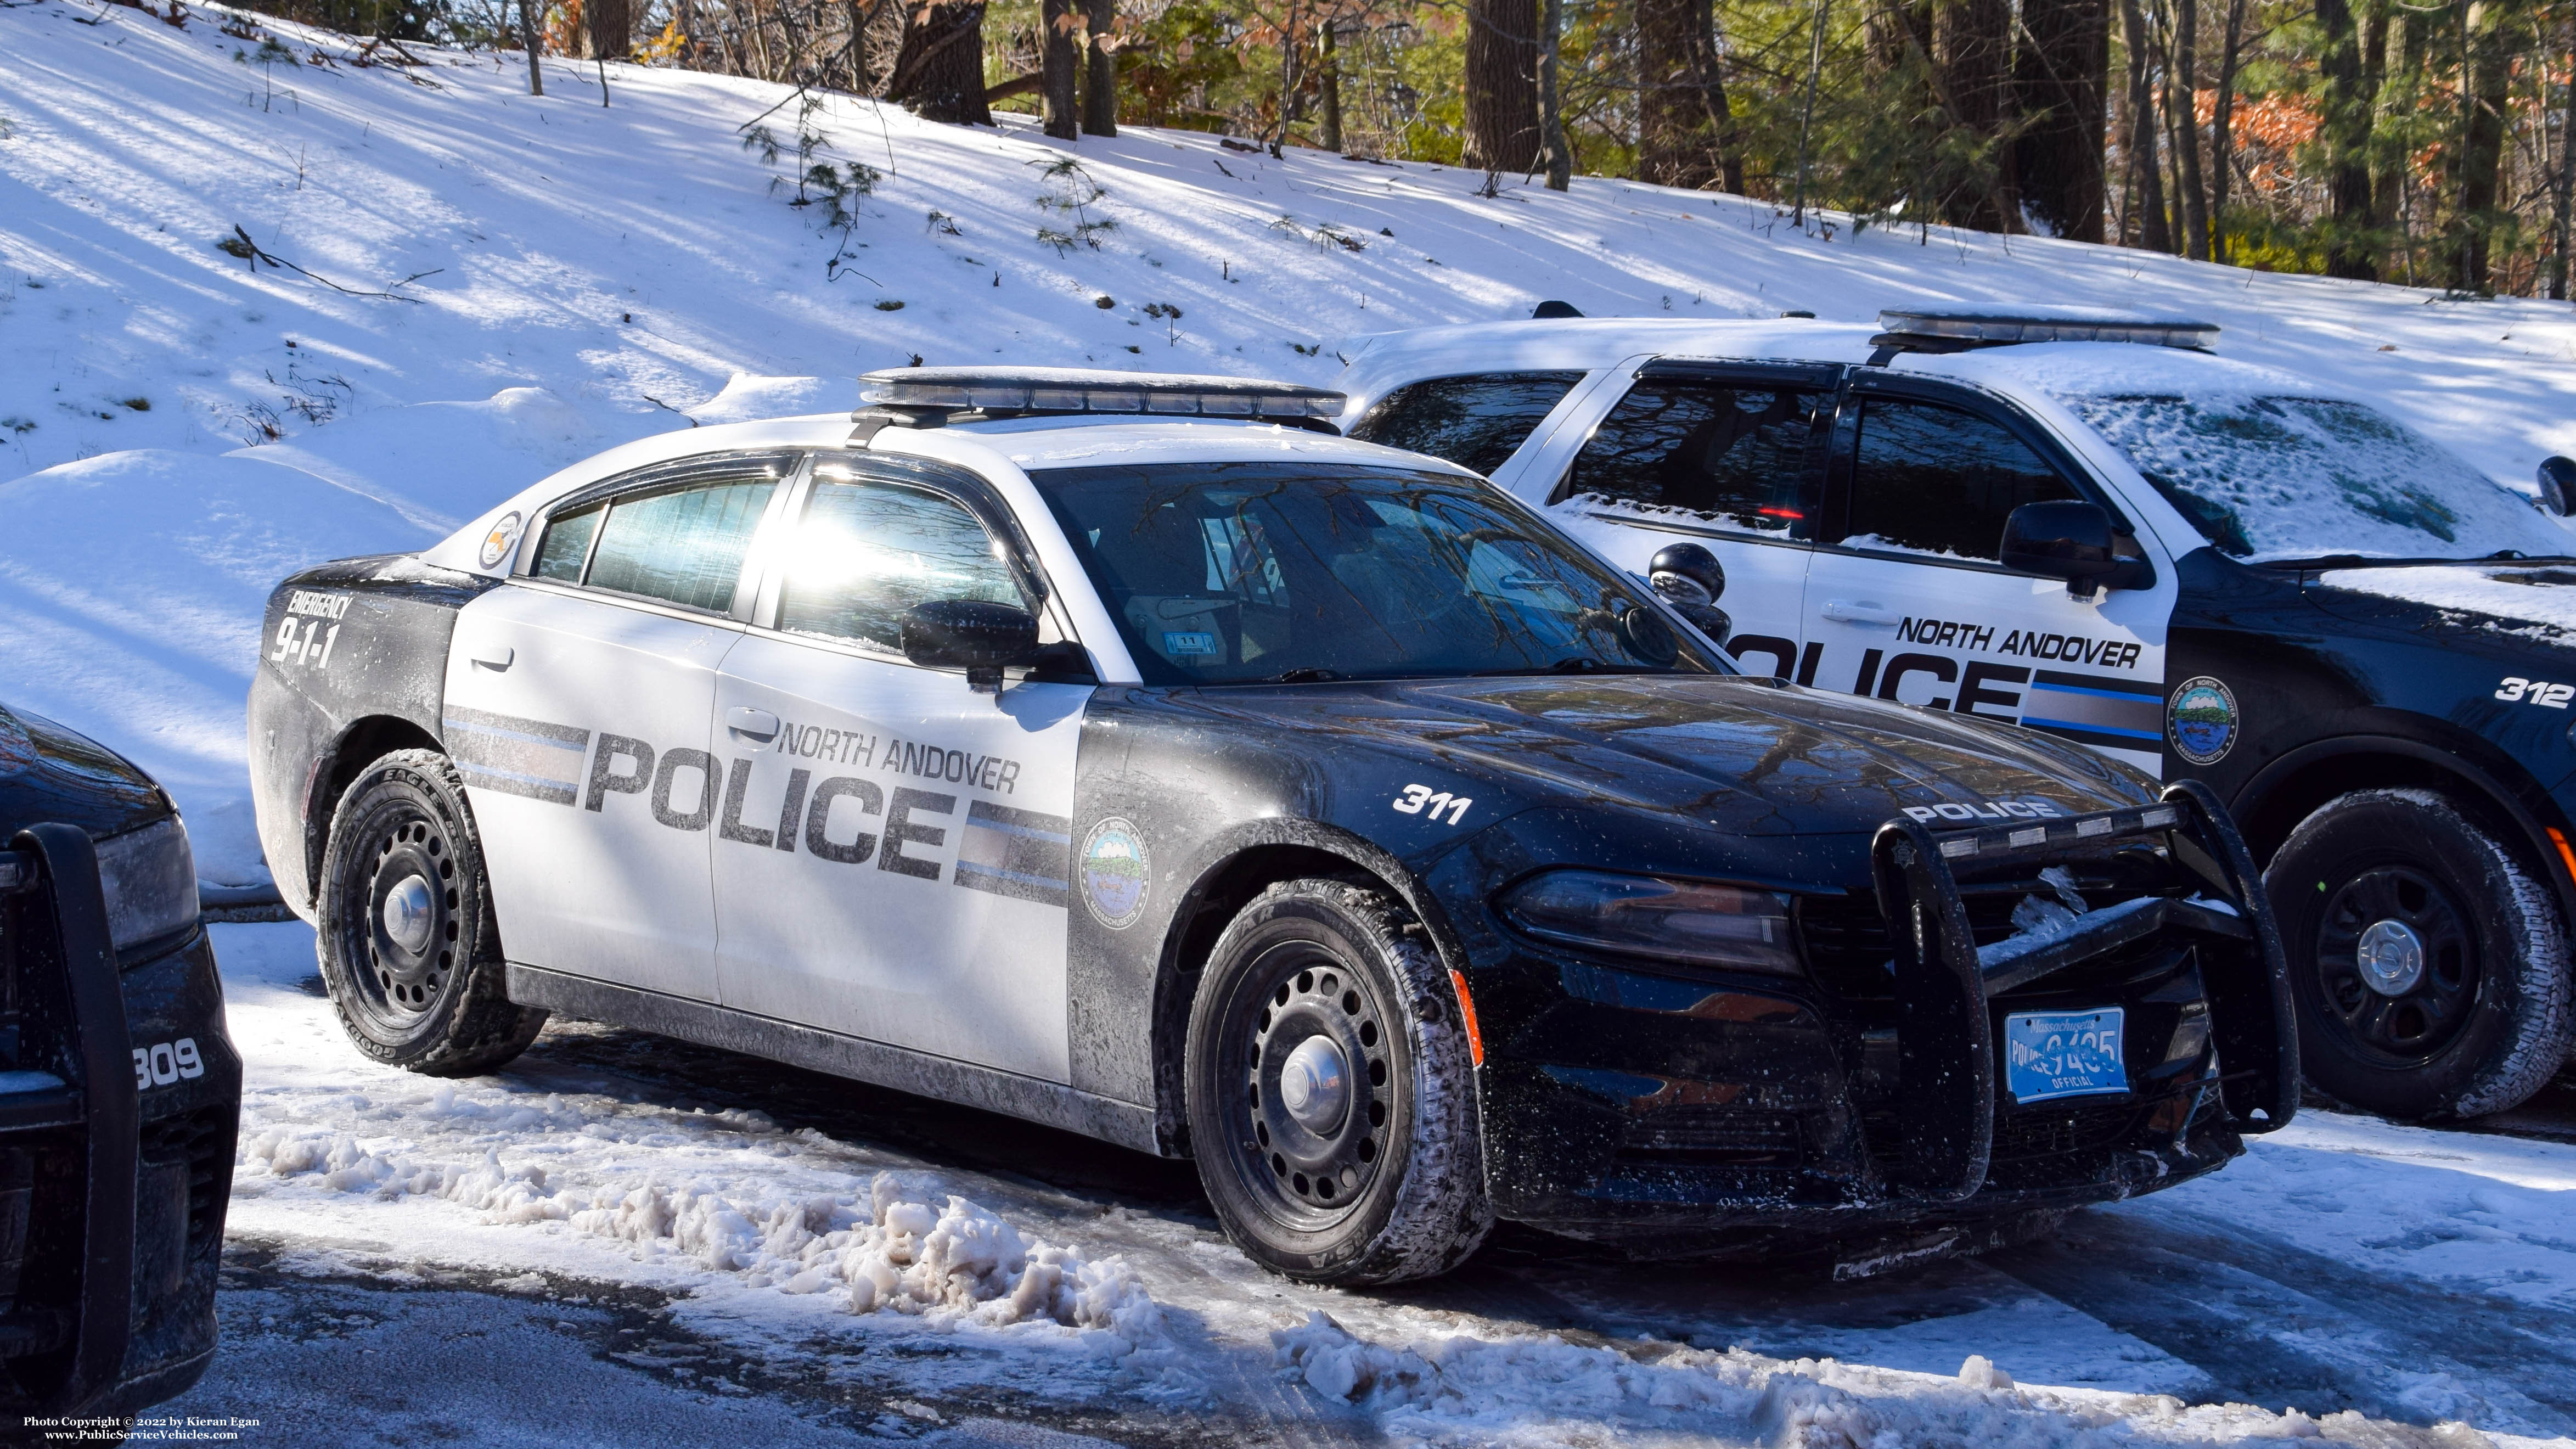 A photo  of North Andover Police
            Cruiser 311, a 2019 Dodge Charger             taken by Kieran Egan